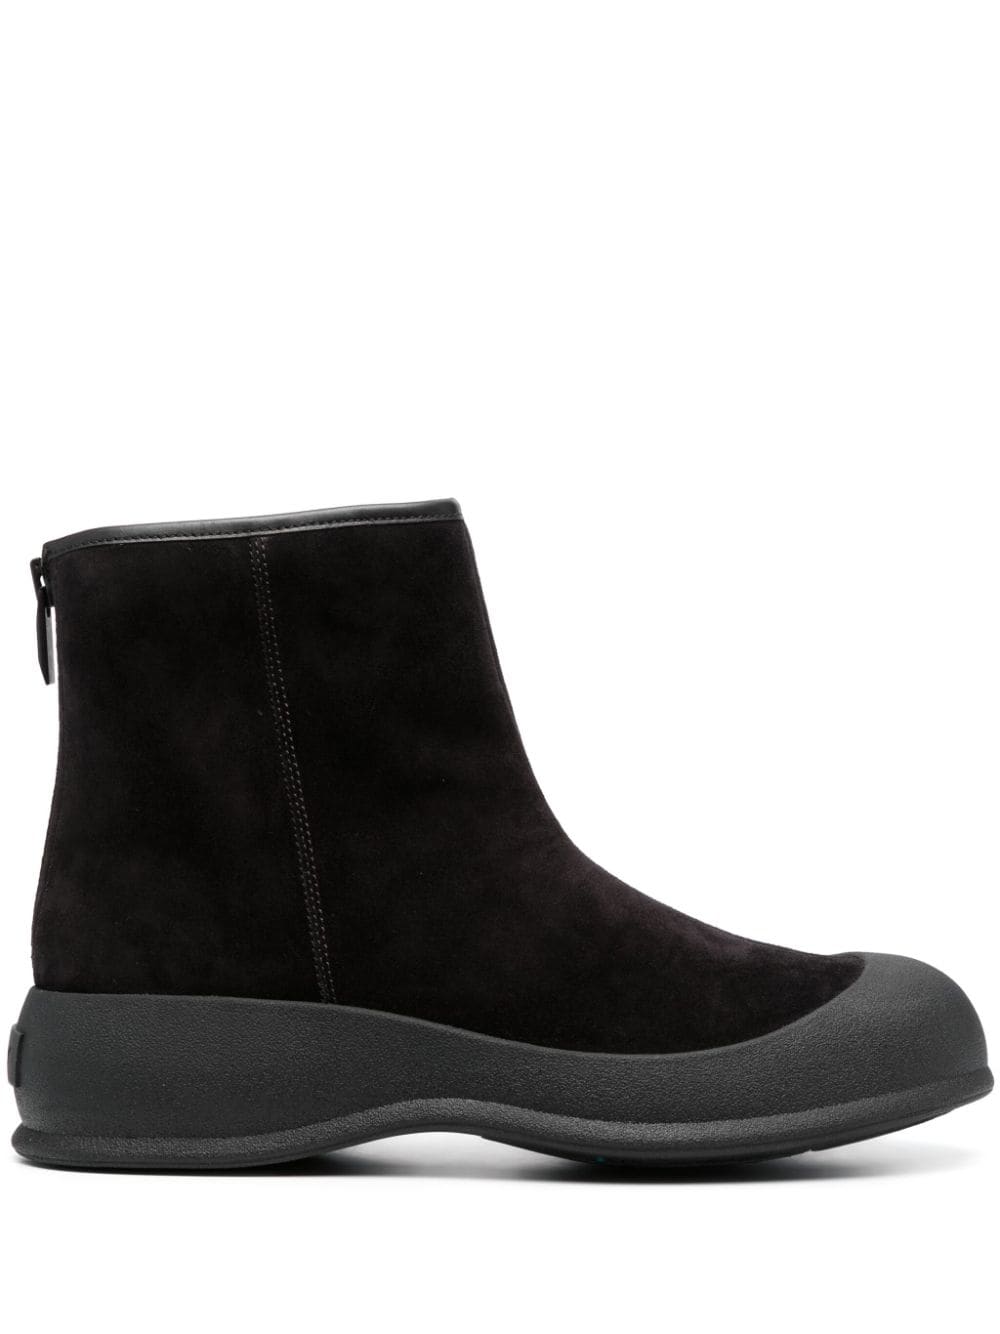 BALLY ELIN SUEDE ANKLE BOOTS